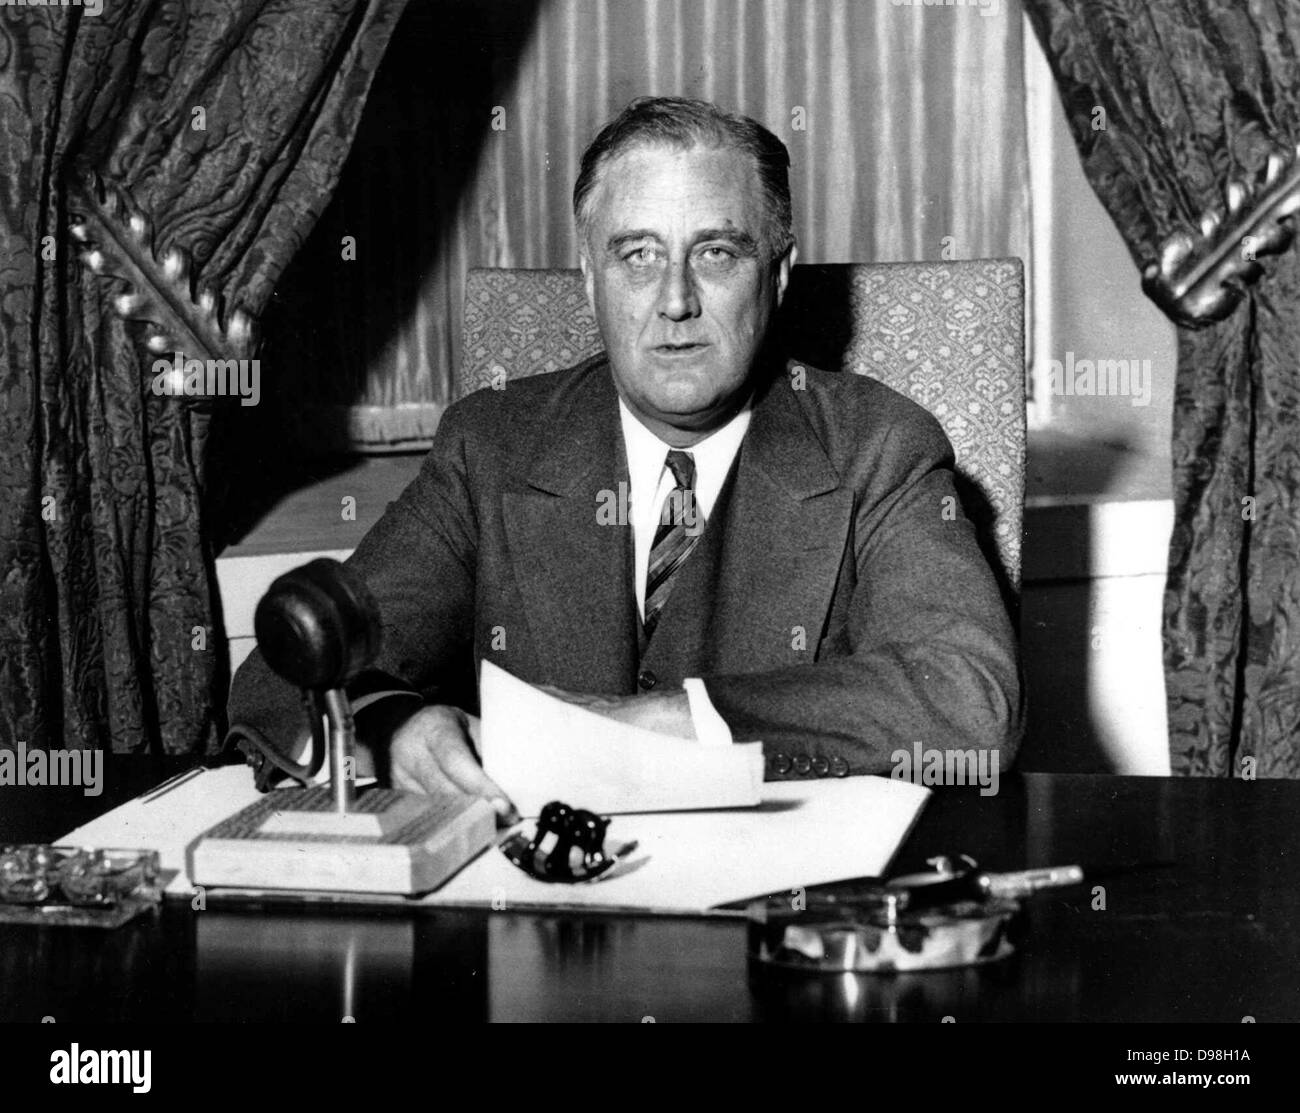 Franklin Delano Roosevelt also known by his initials, FDR, was the 32nd President of the United States (1933–1945)The fireside chats were a series of thirty evening radio addresses given by United States President Franklin D. Roosevelt between 1933 and 1944 Stock Photo